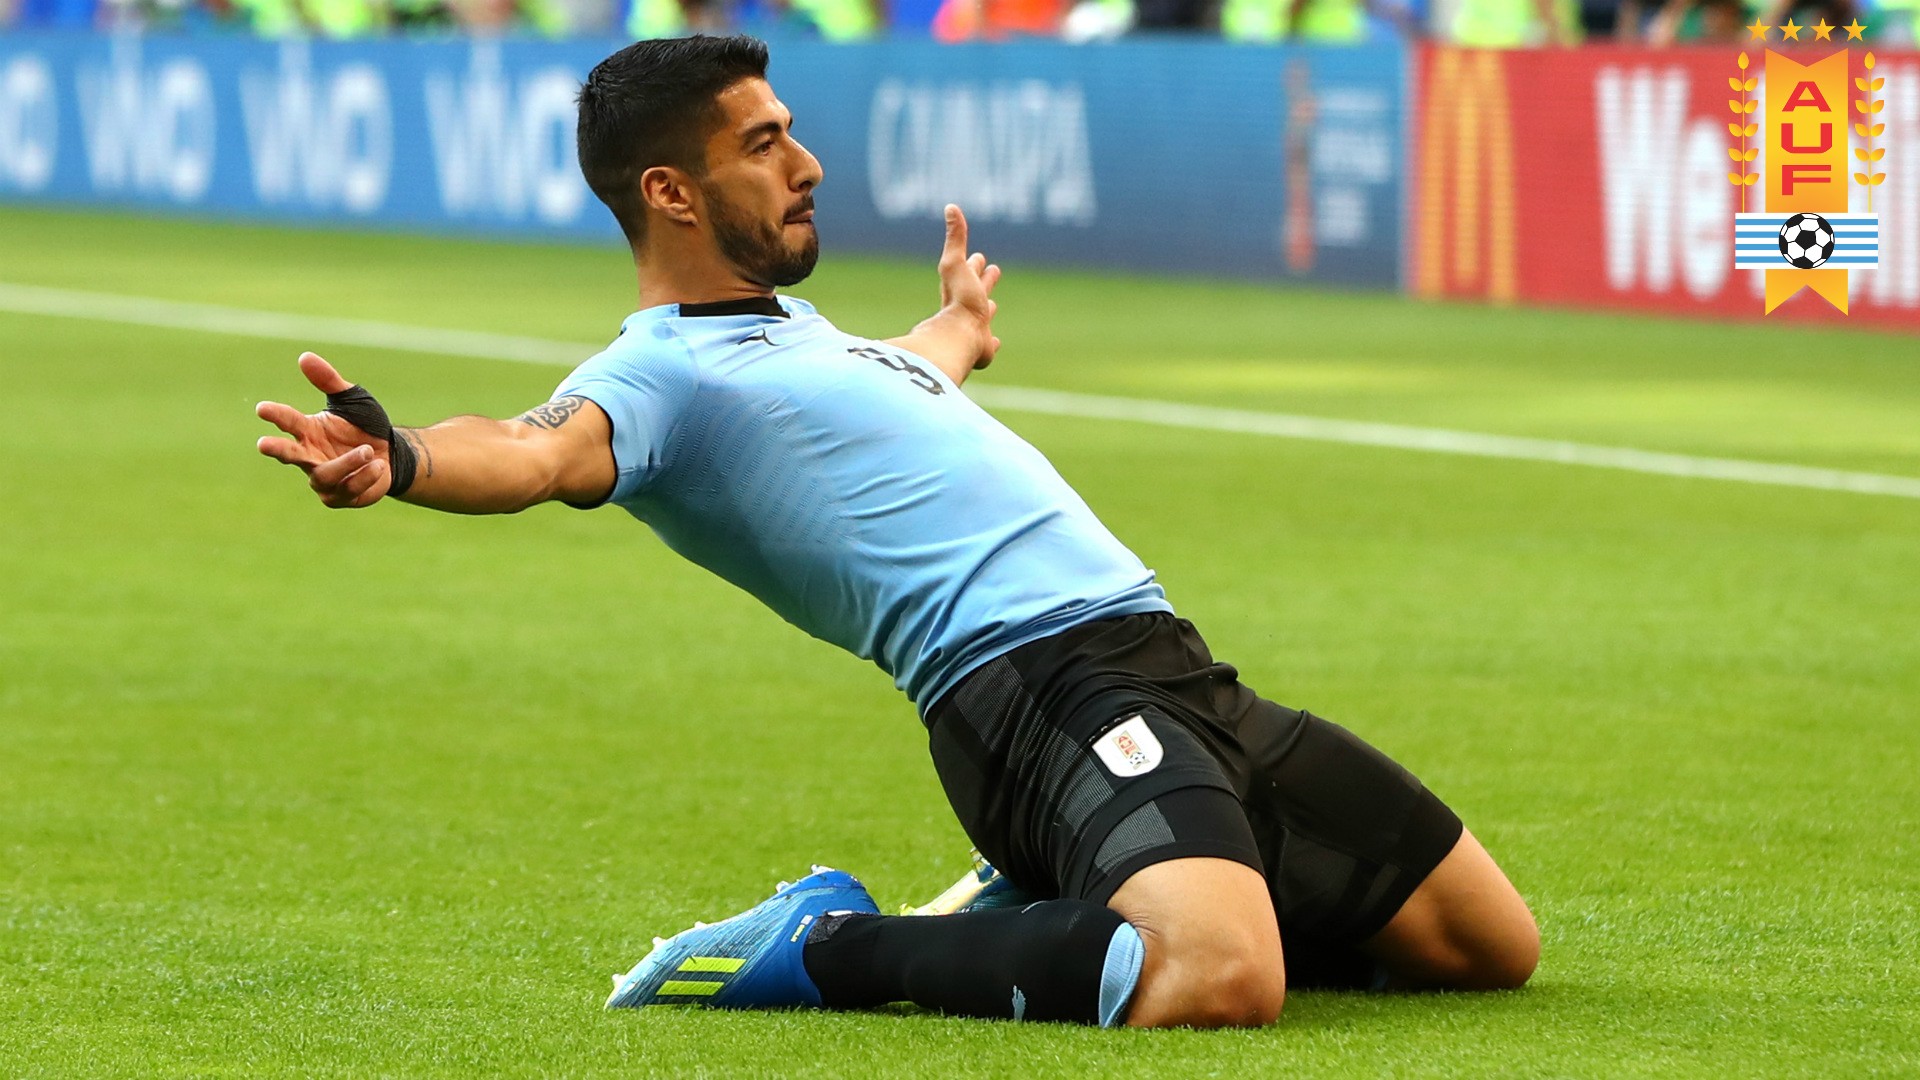 Wallpapers HD Luis Suarez Uruguay With Resolution 1920X1080 pixel. You can make this wallpaper for your Mac or Windows Desktop Background, iPhone, Android or Tablet and another Smartphone device for free